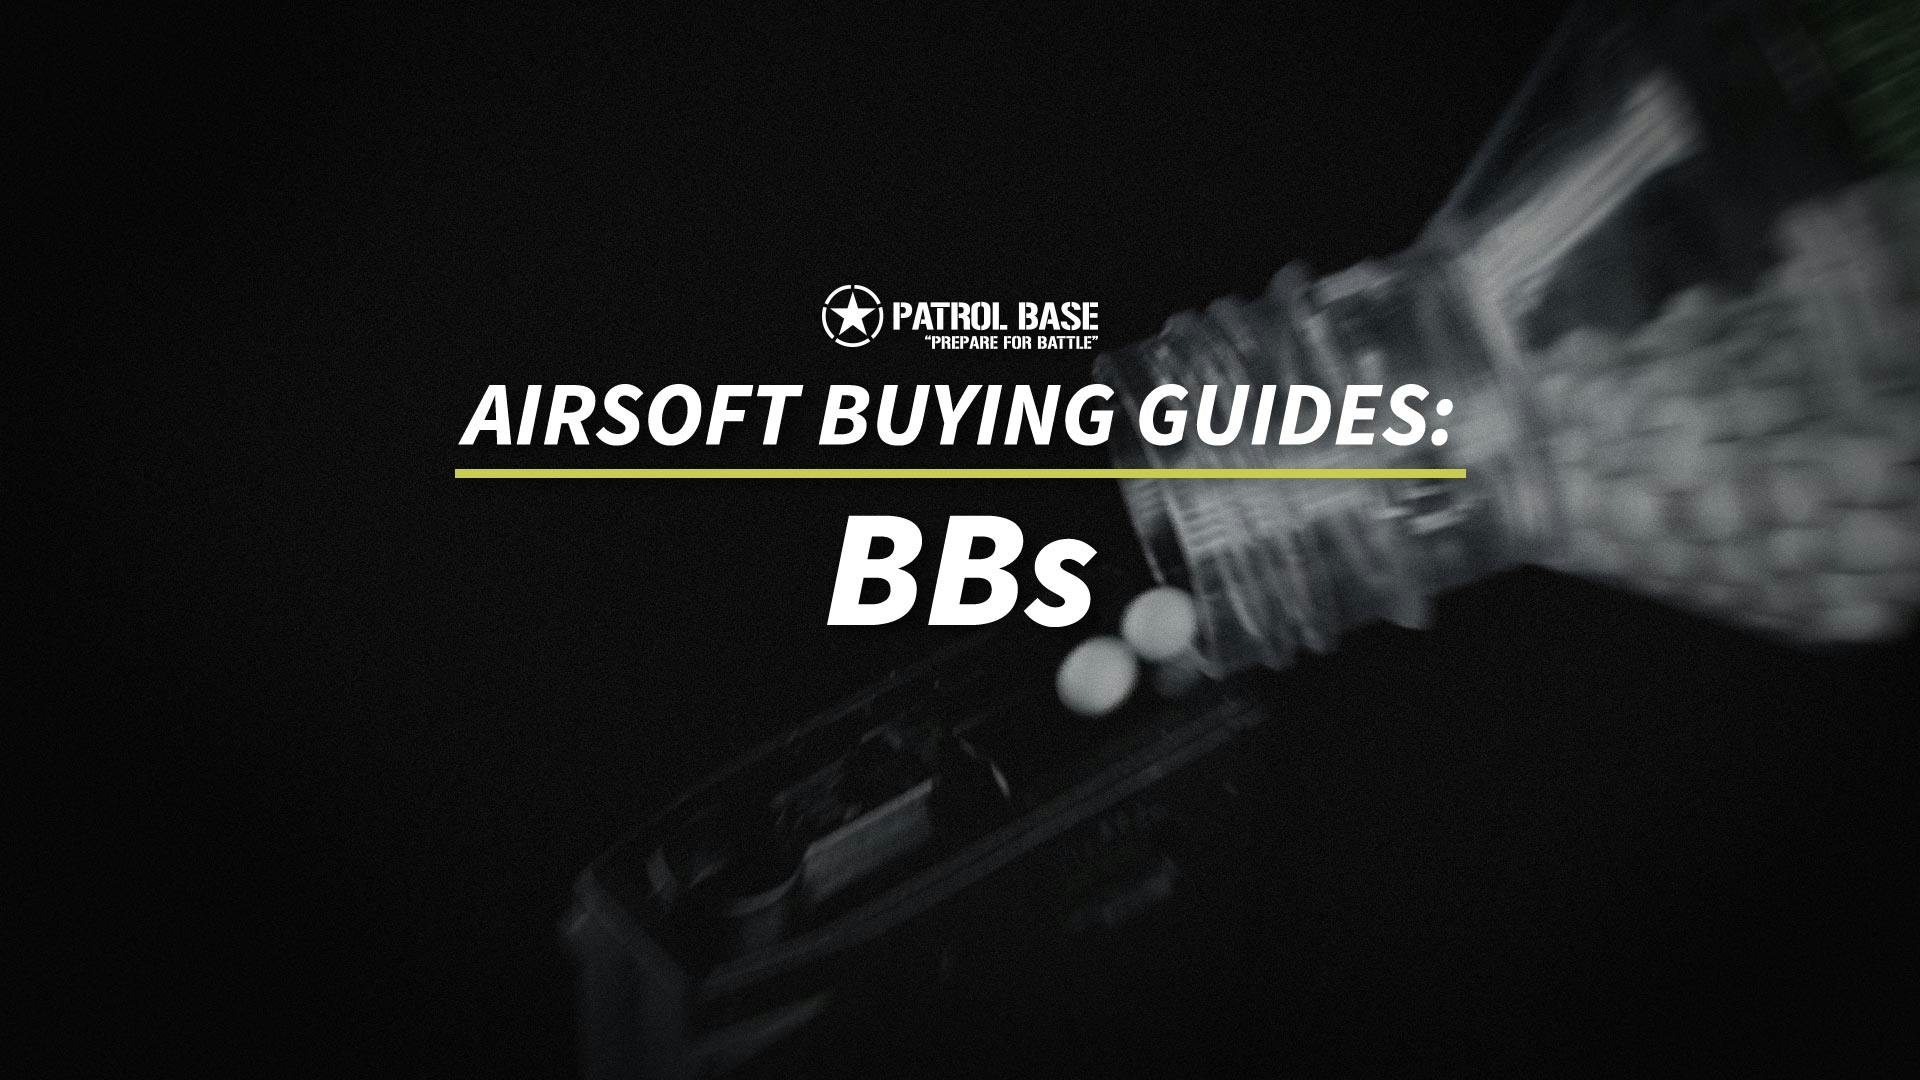 About Airsoft BBs: All You Need To Know About BB Sizes, Weights